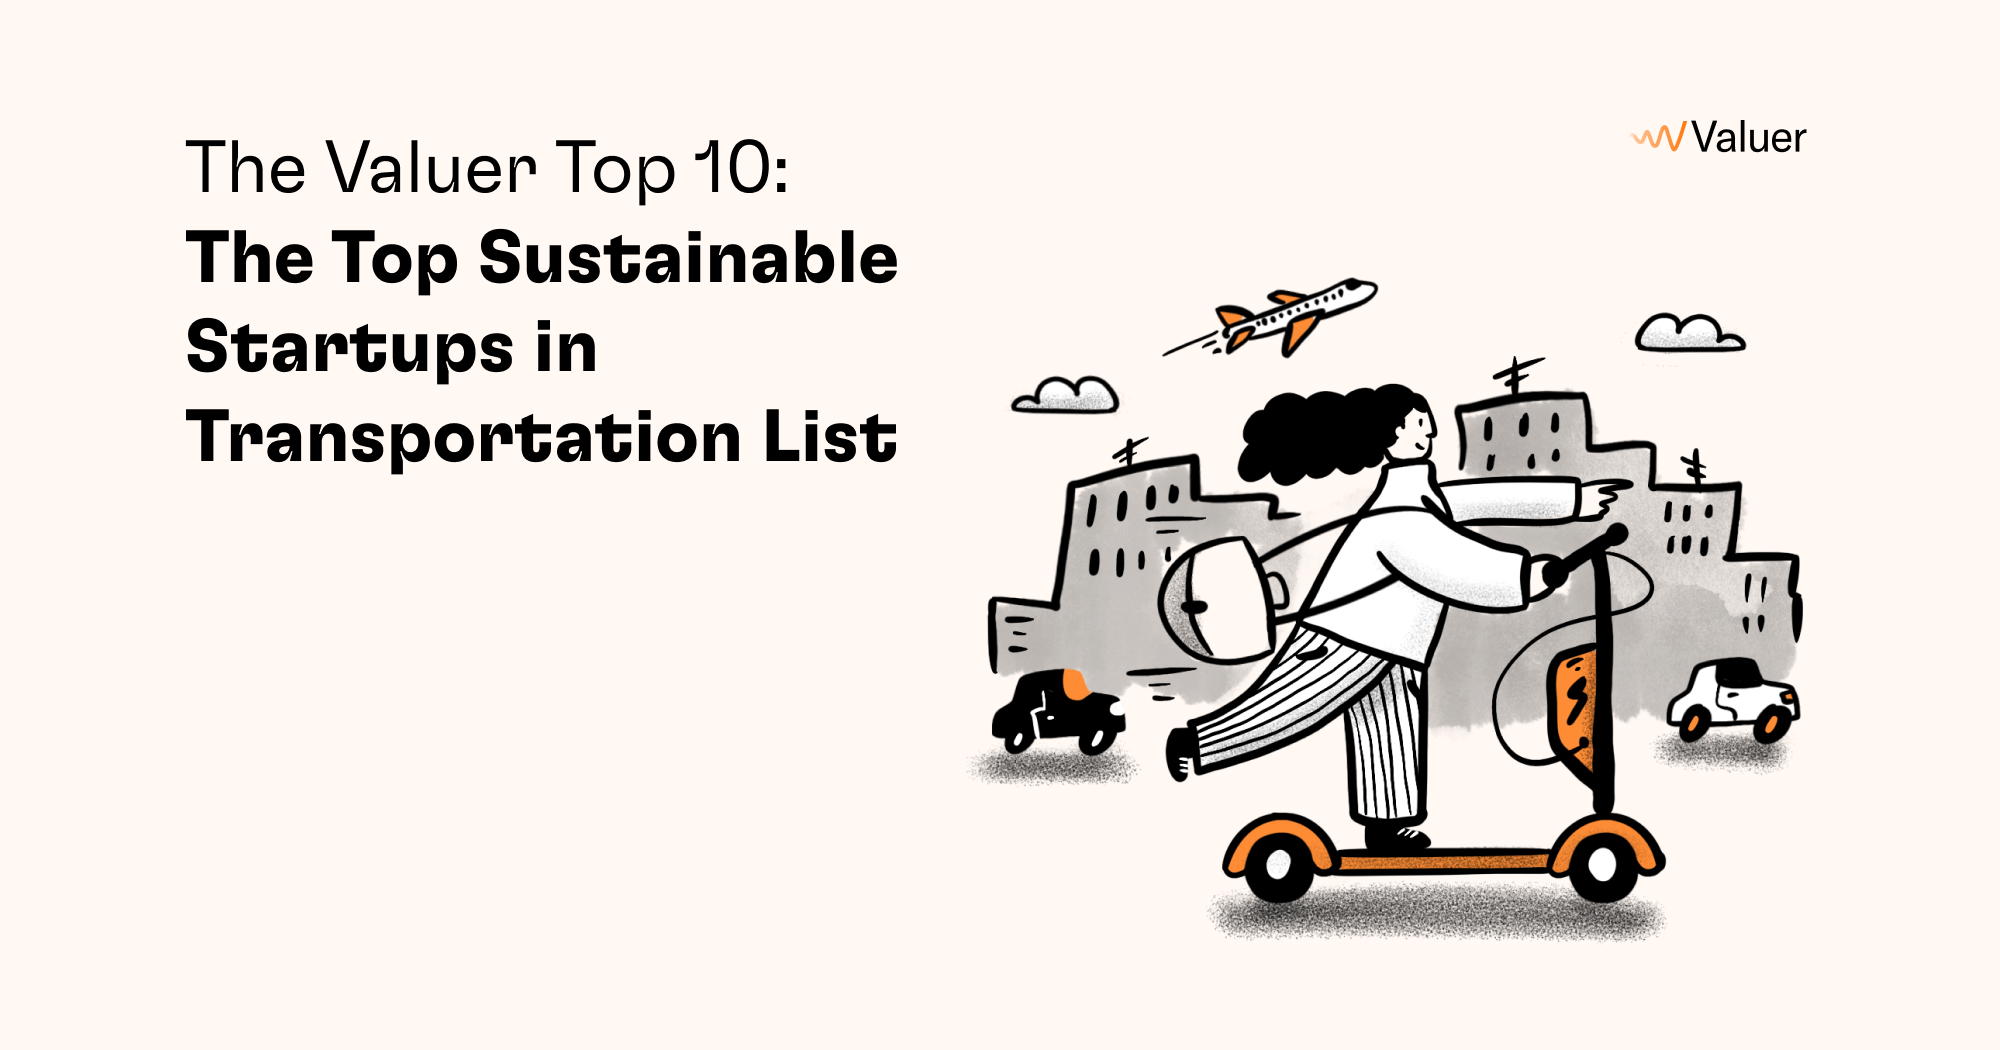 The Valuer Top 10: The Top Sustainable Startups in Transportation List